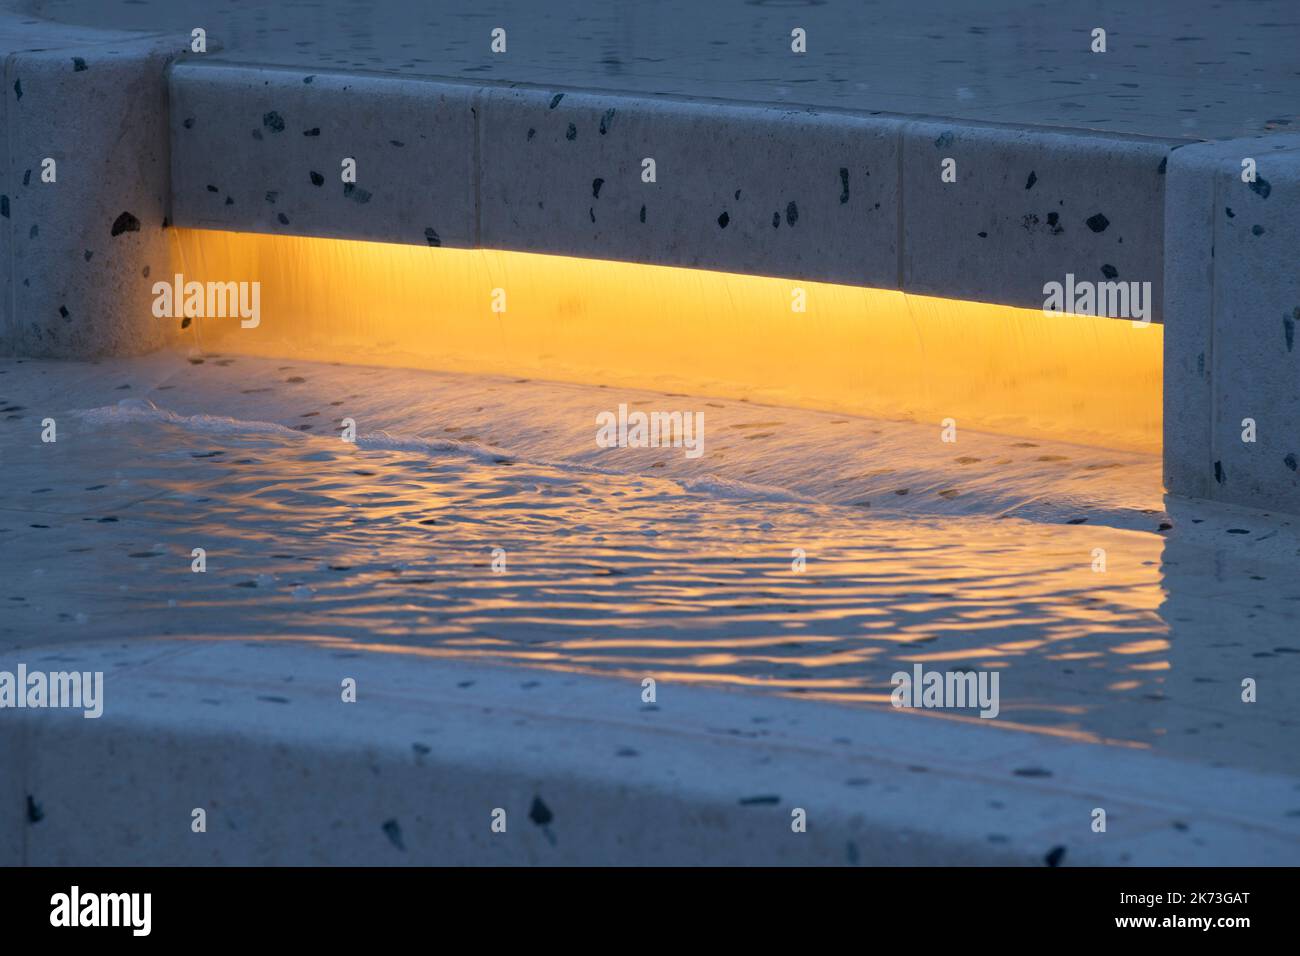 Detail of integrated water feature lighting. Exchange Square, London, United Kingdom. Architect: DSDHA, 2022. Stock Photo